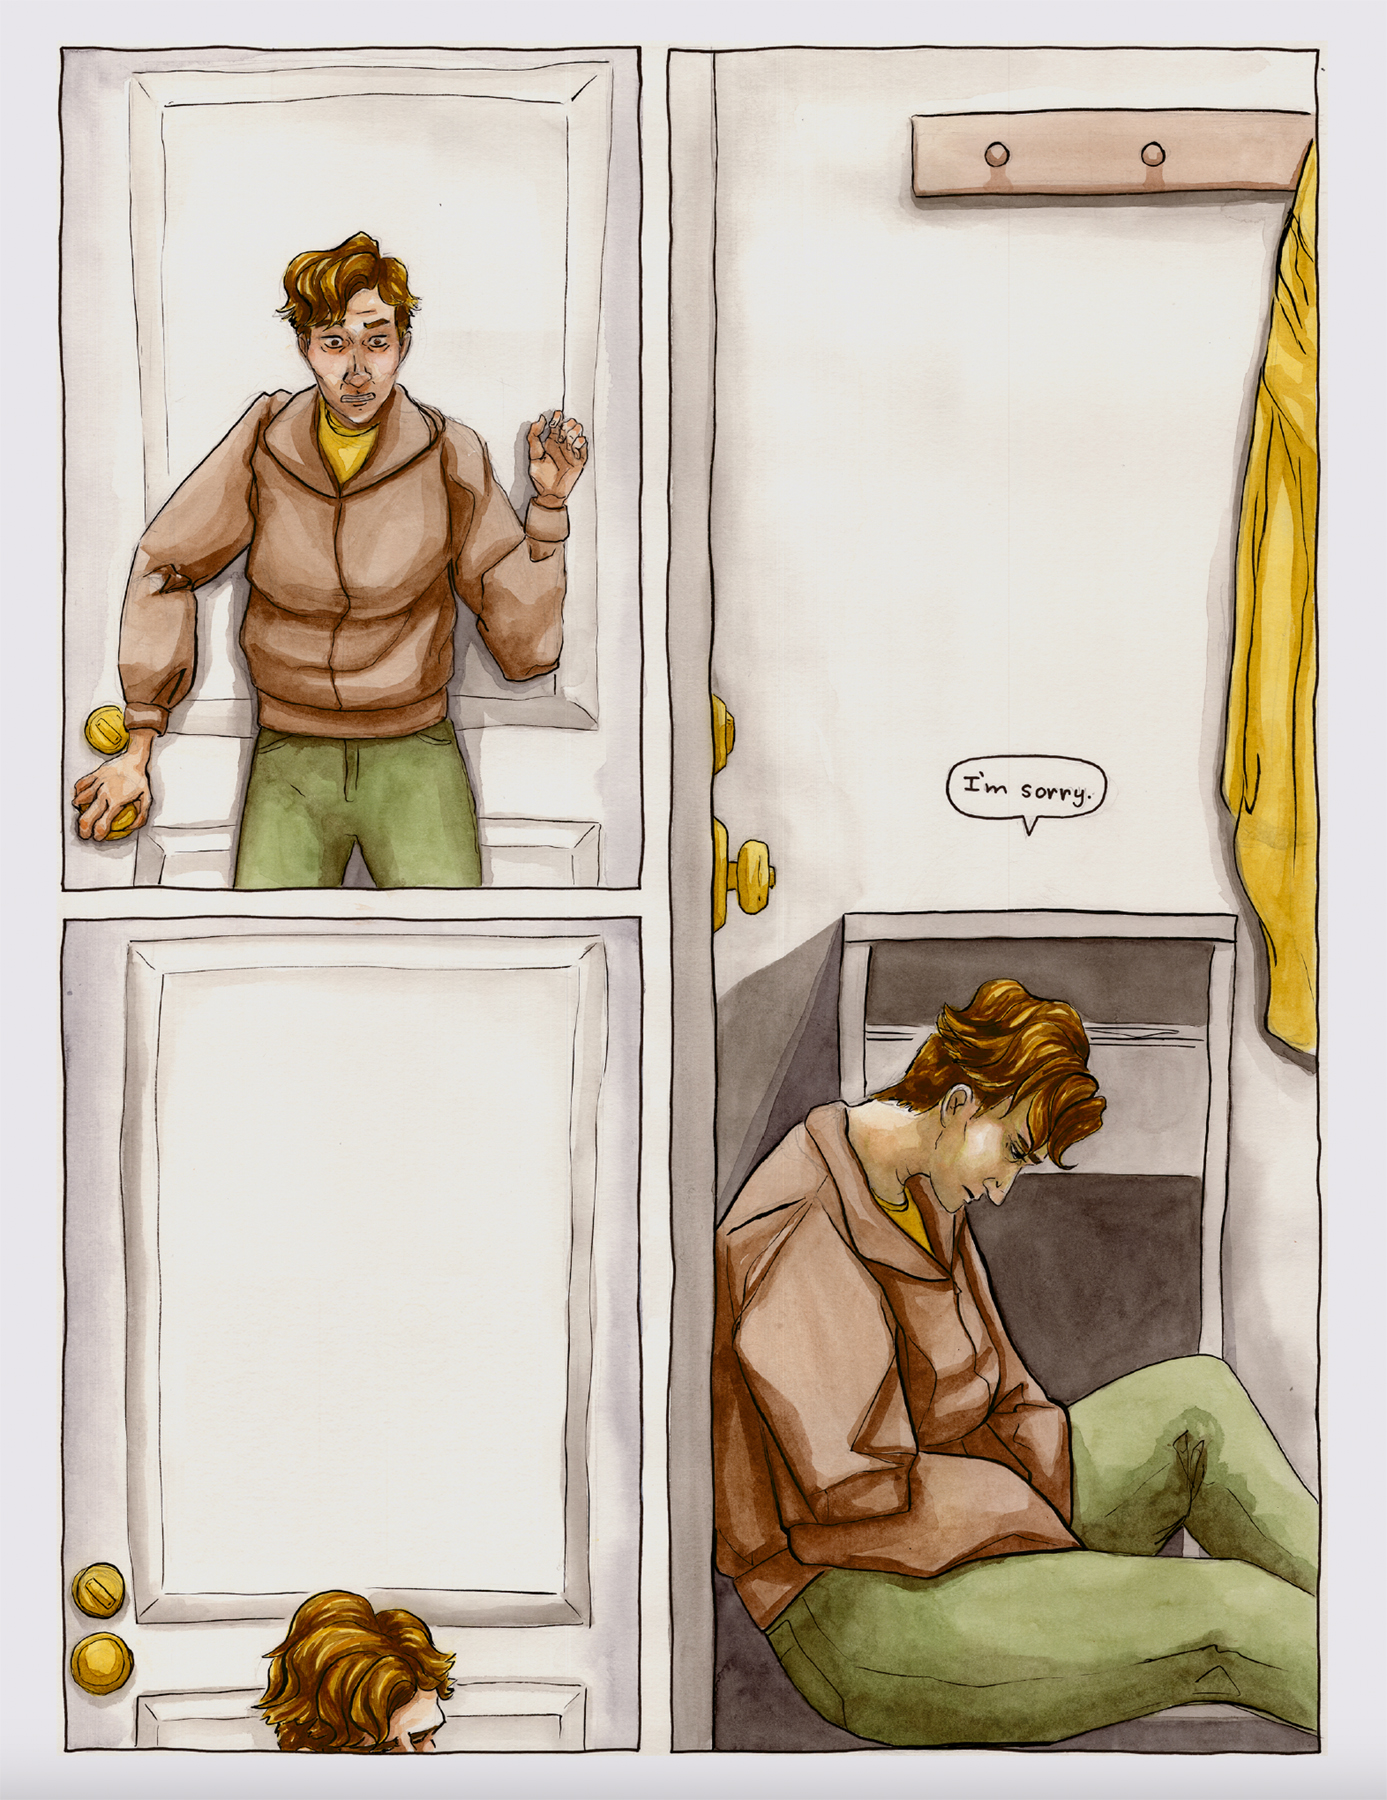 comic page from Against the Floor. The main character Killian slumps in front of a door and apologizes. Image courtesy of Daniell Stromanthe